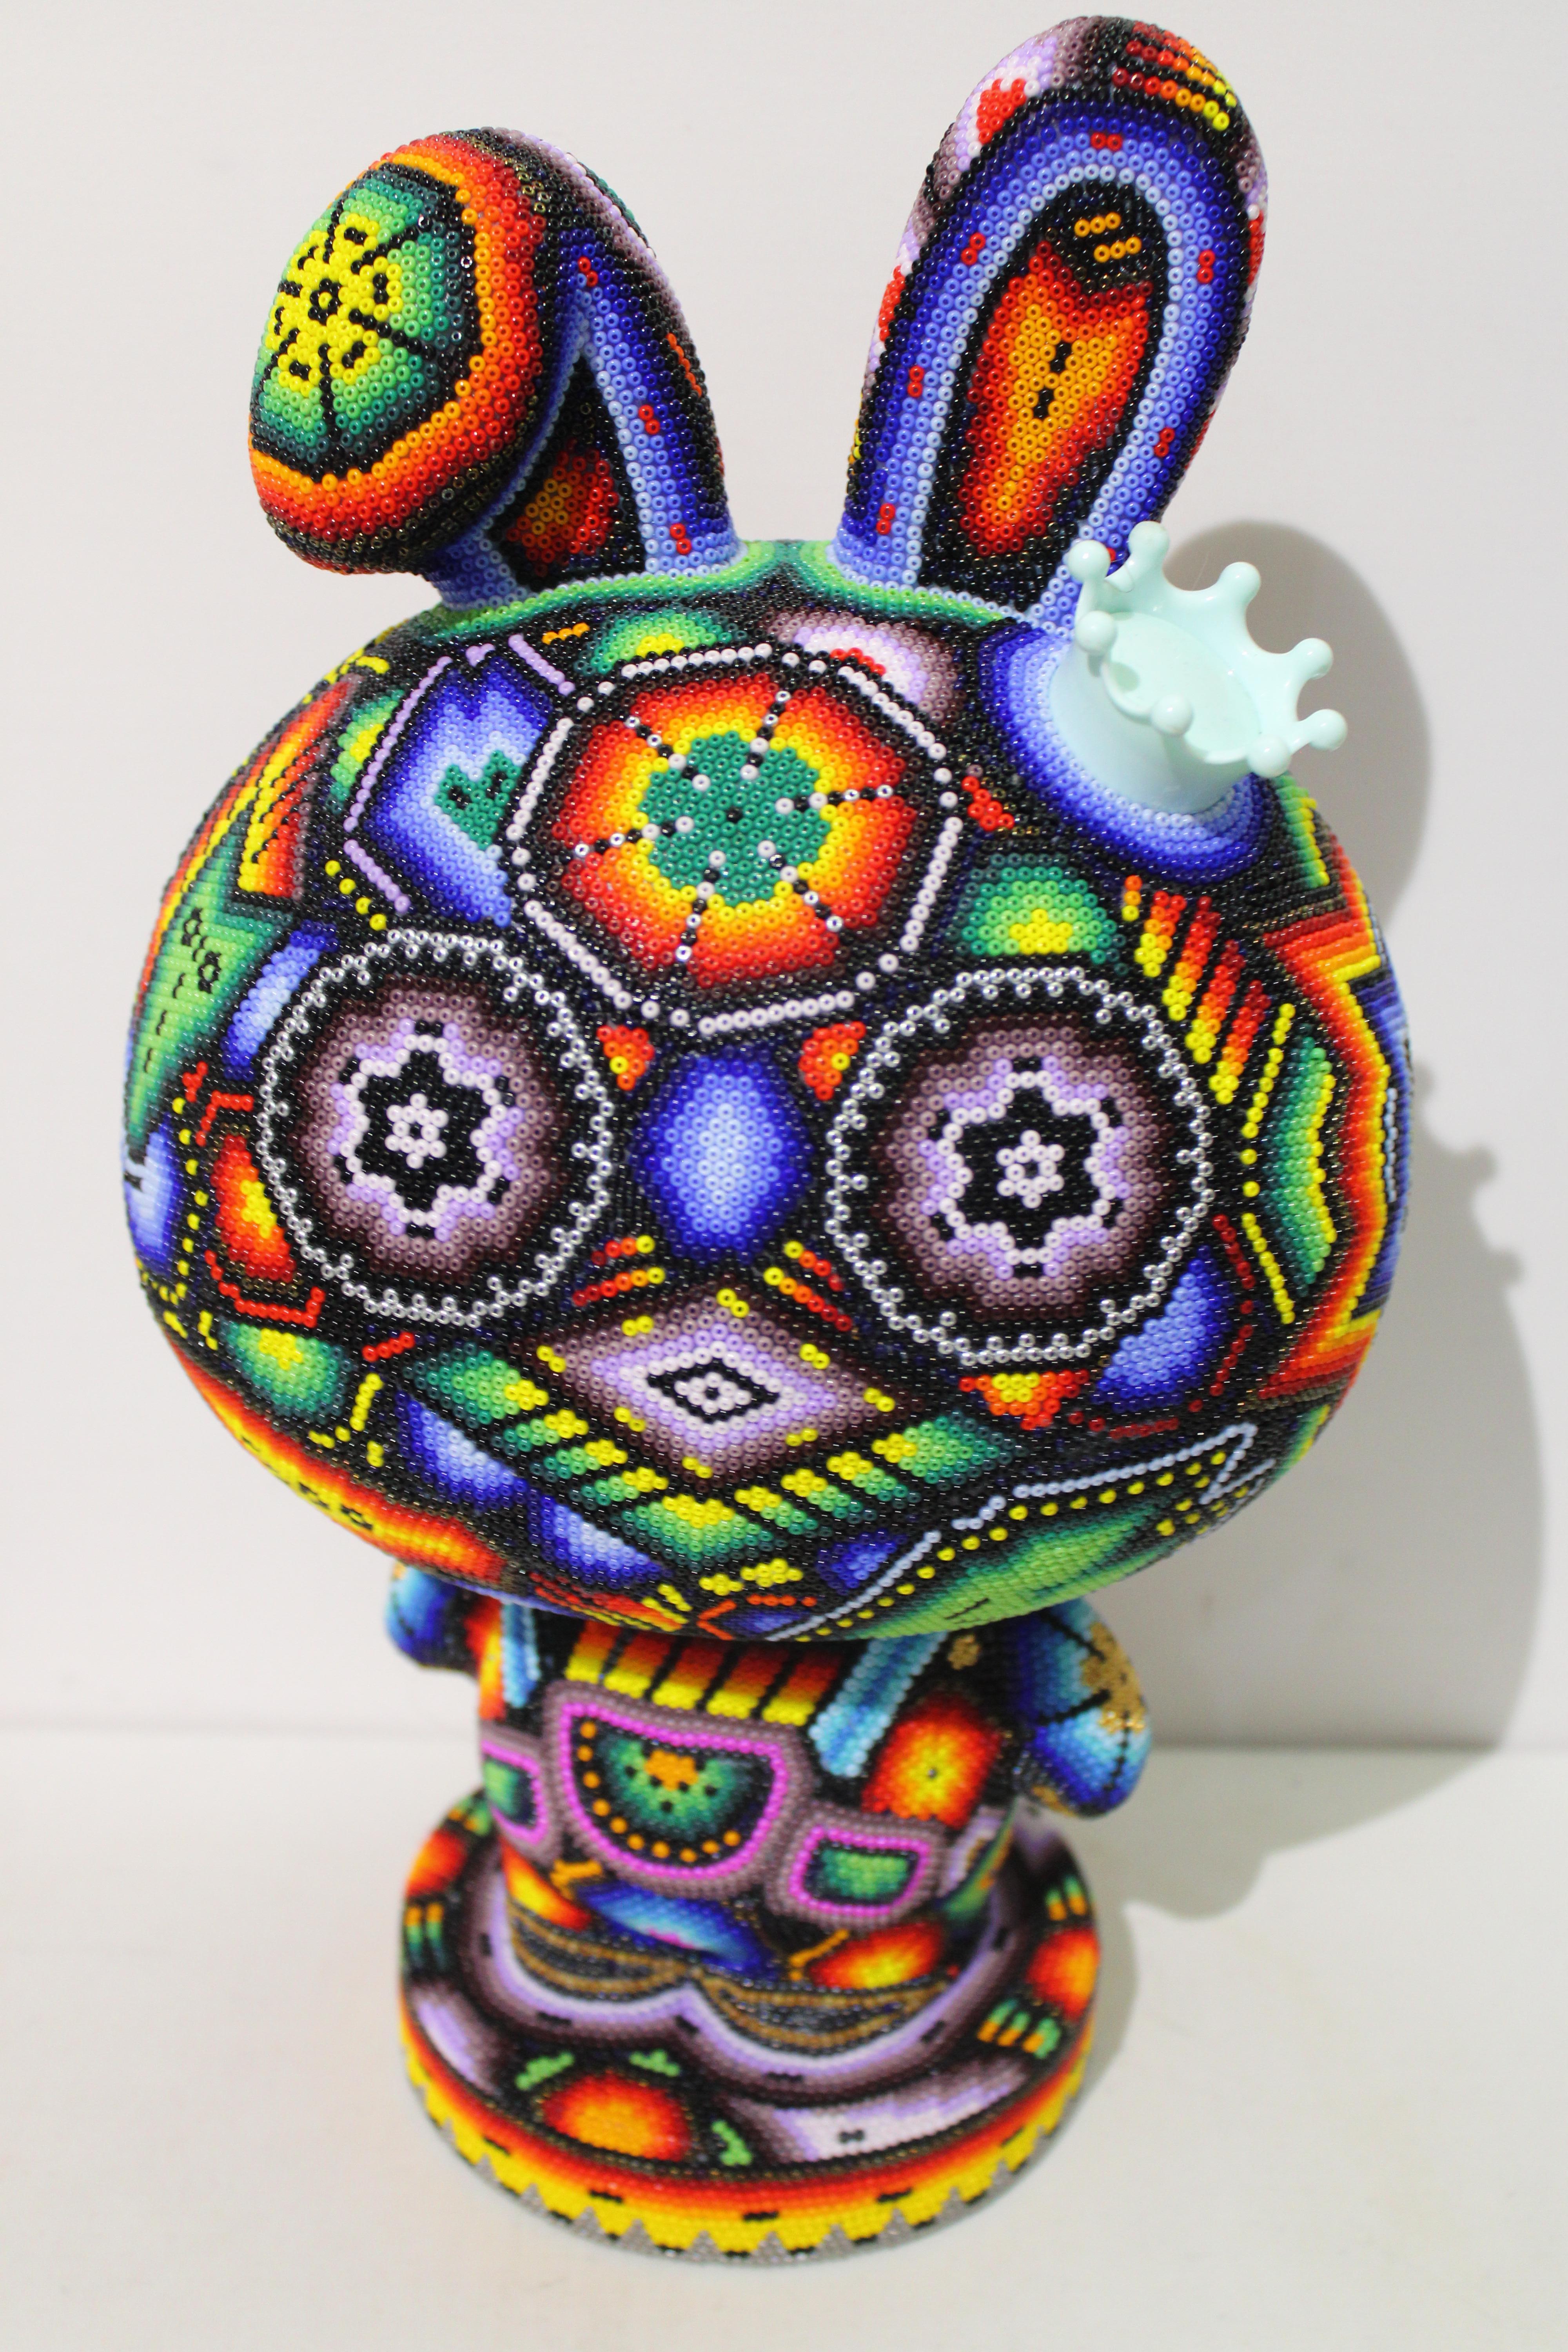 CHROMA aka Rick Wolfryd  Abstract Sculpture - "Care Bear"  from Huichol ALTERATIONS Series